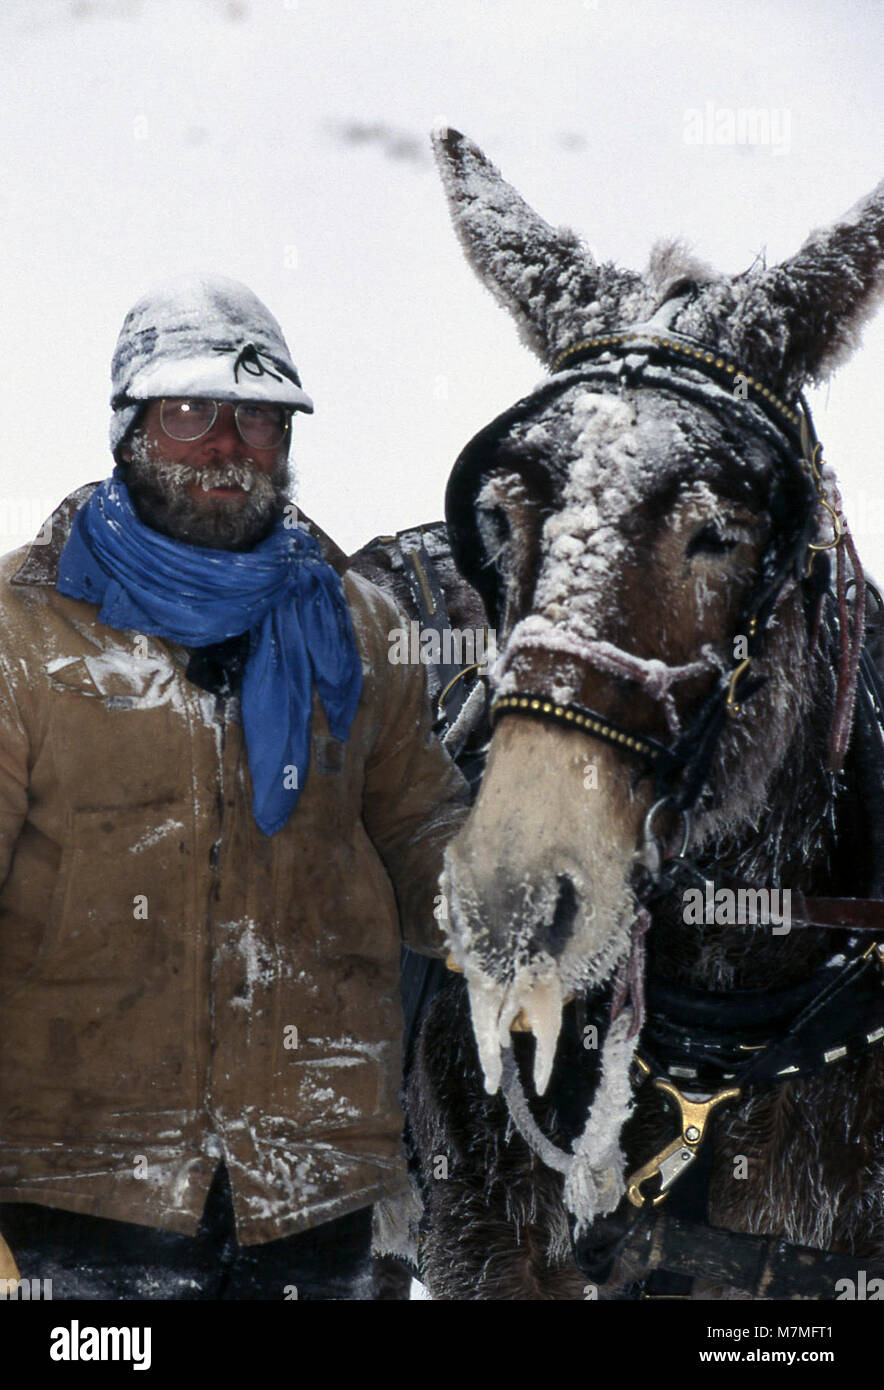 Wrangler, Ben Cunningham, and Billy, the mule, taking food to